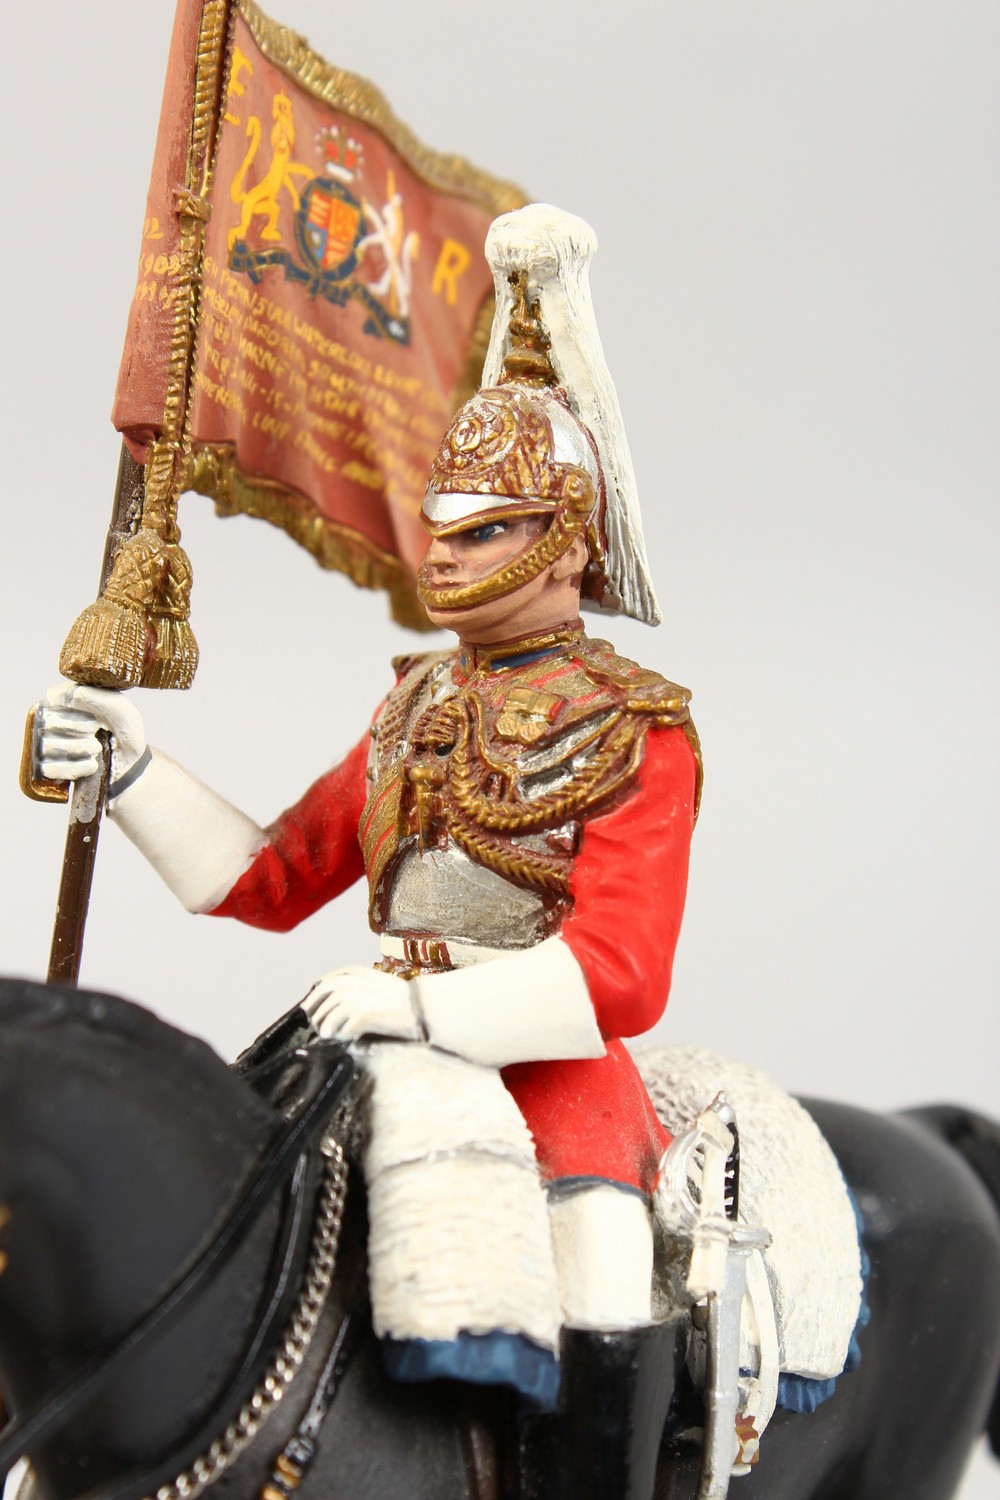 SQUADRON CORPORAL MAJOR OF THE LIFE GUARDS, with sovereigns standard, 6.5ins high, on a wooden - Image 2 of 5